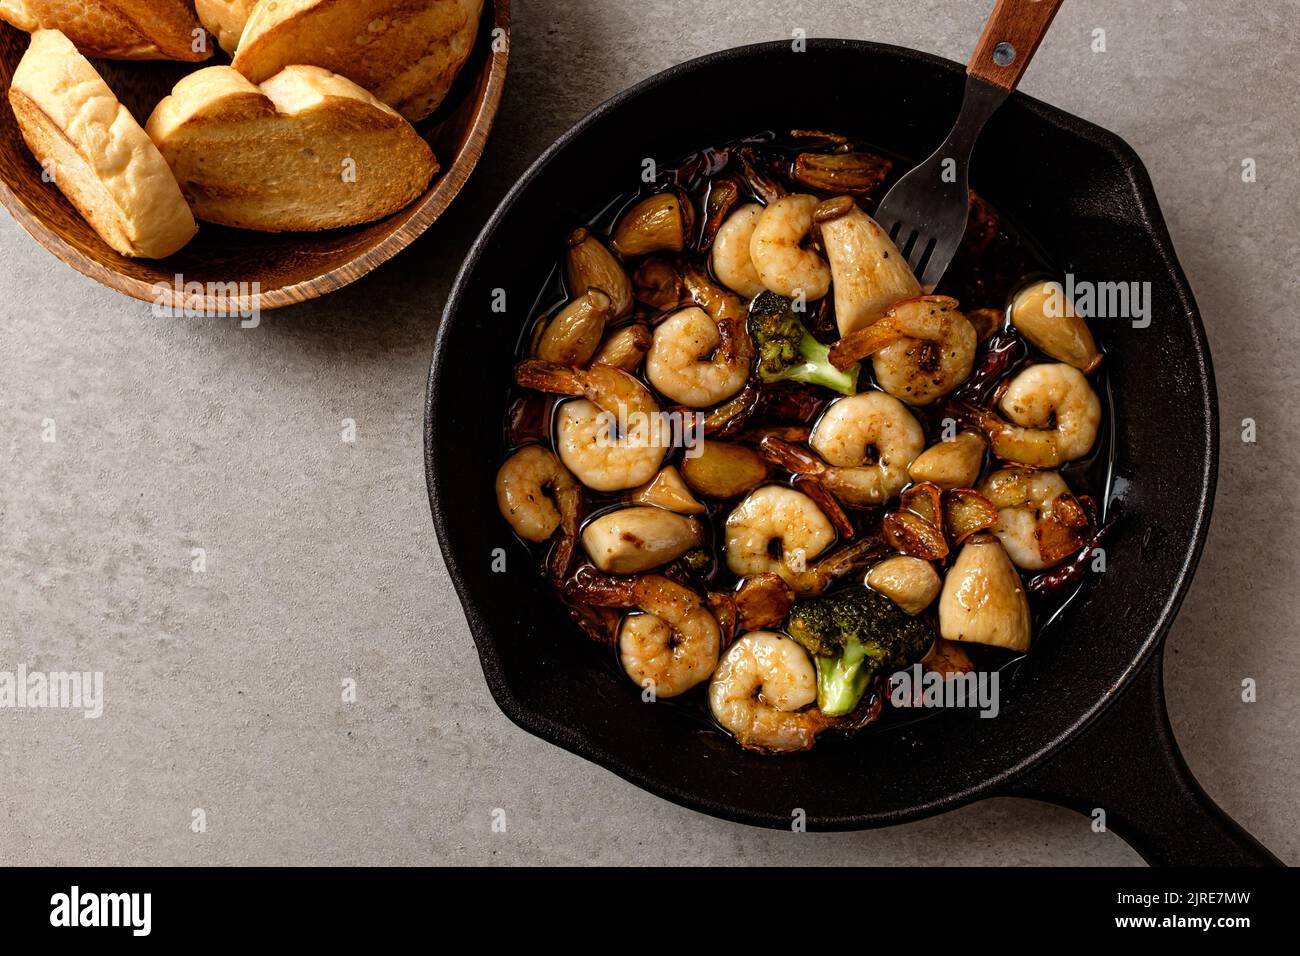 Garlic and peperoncino flavored olive oil. food with shrimp. spanish food culture Stock Photo